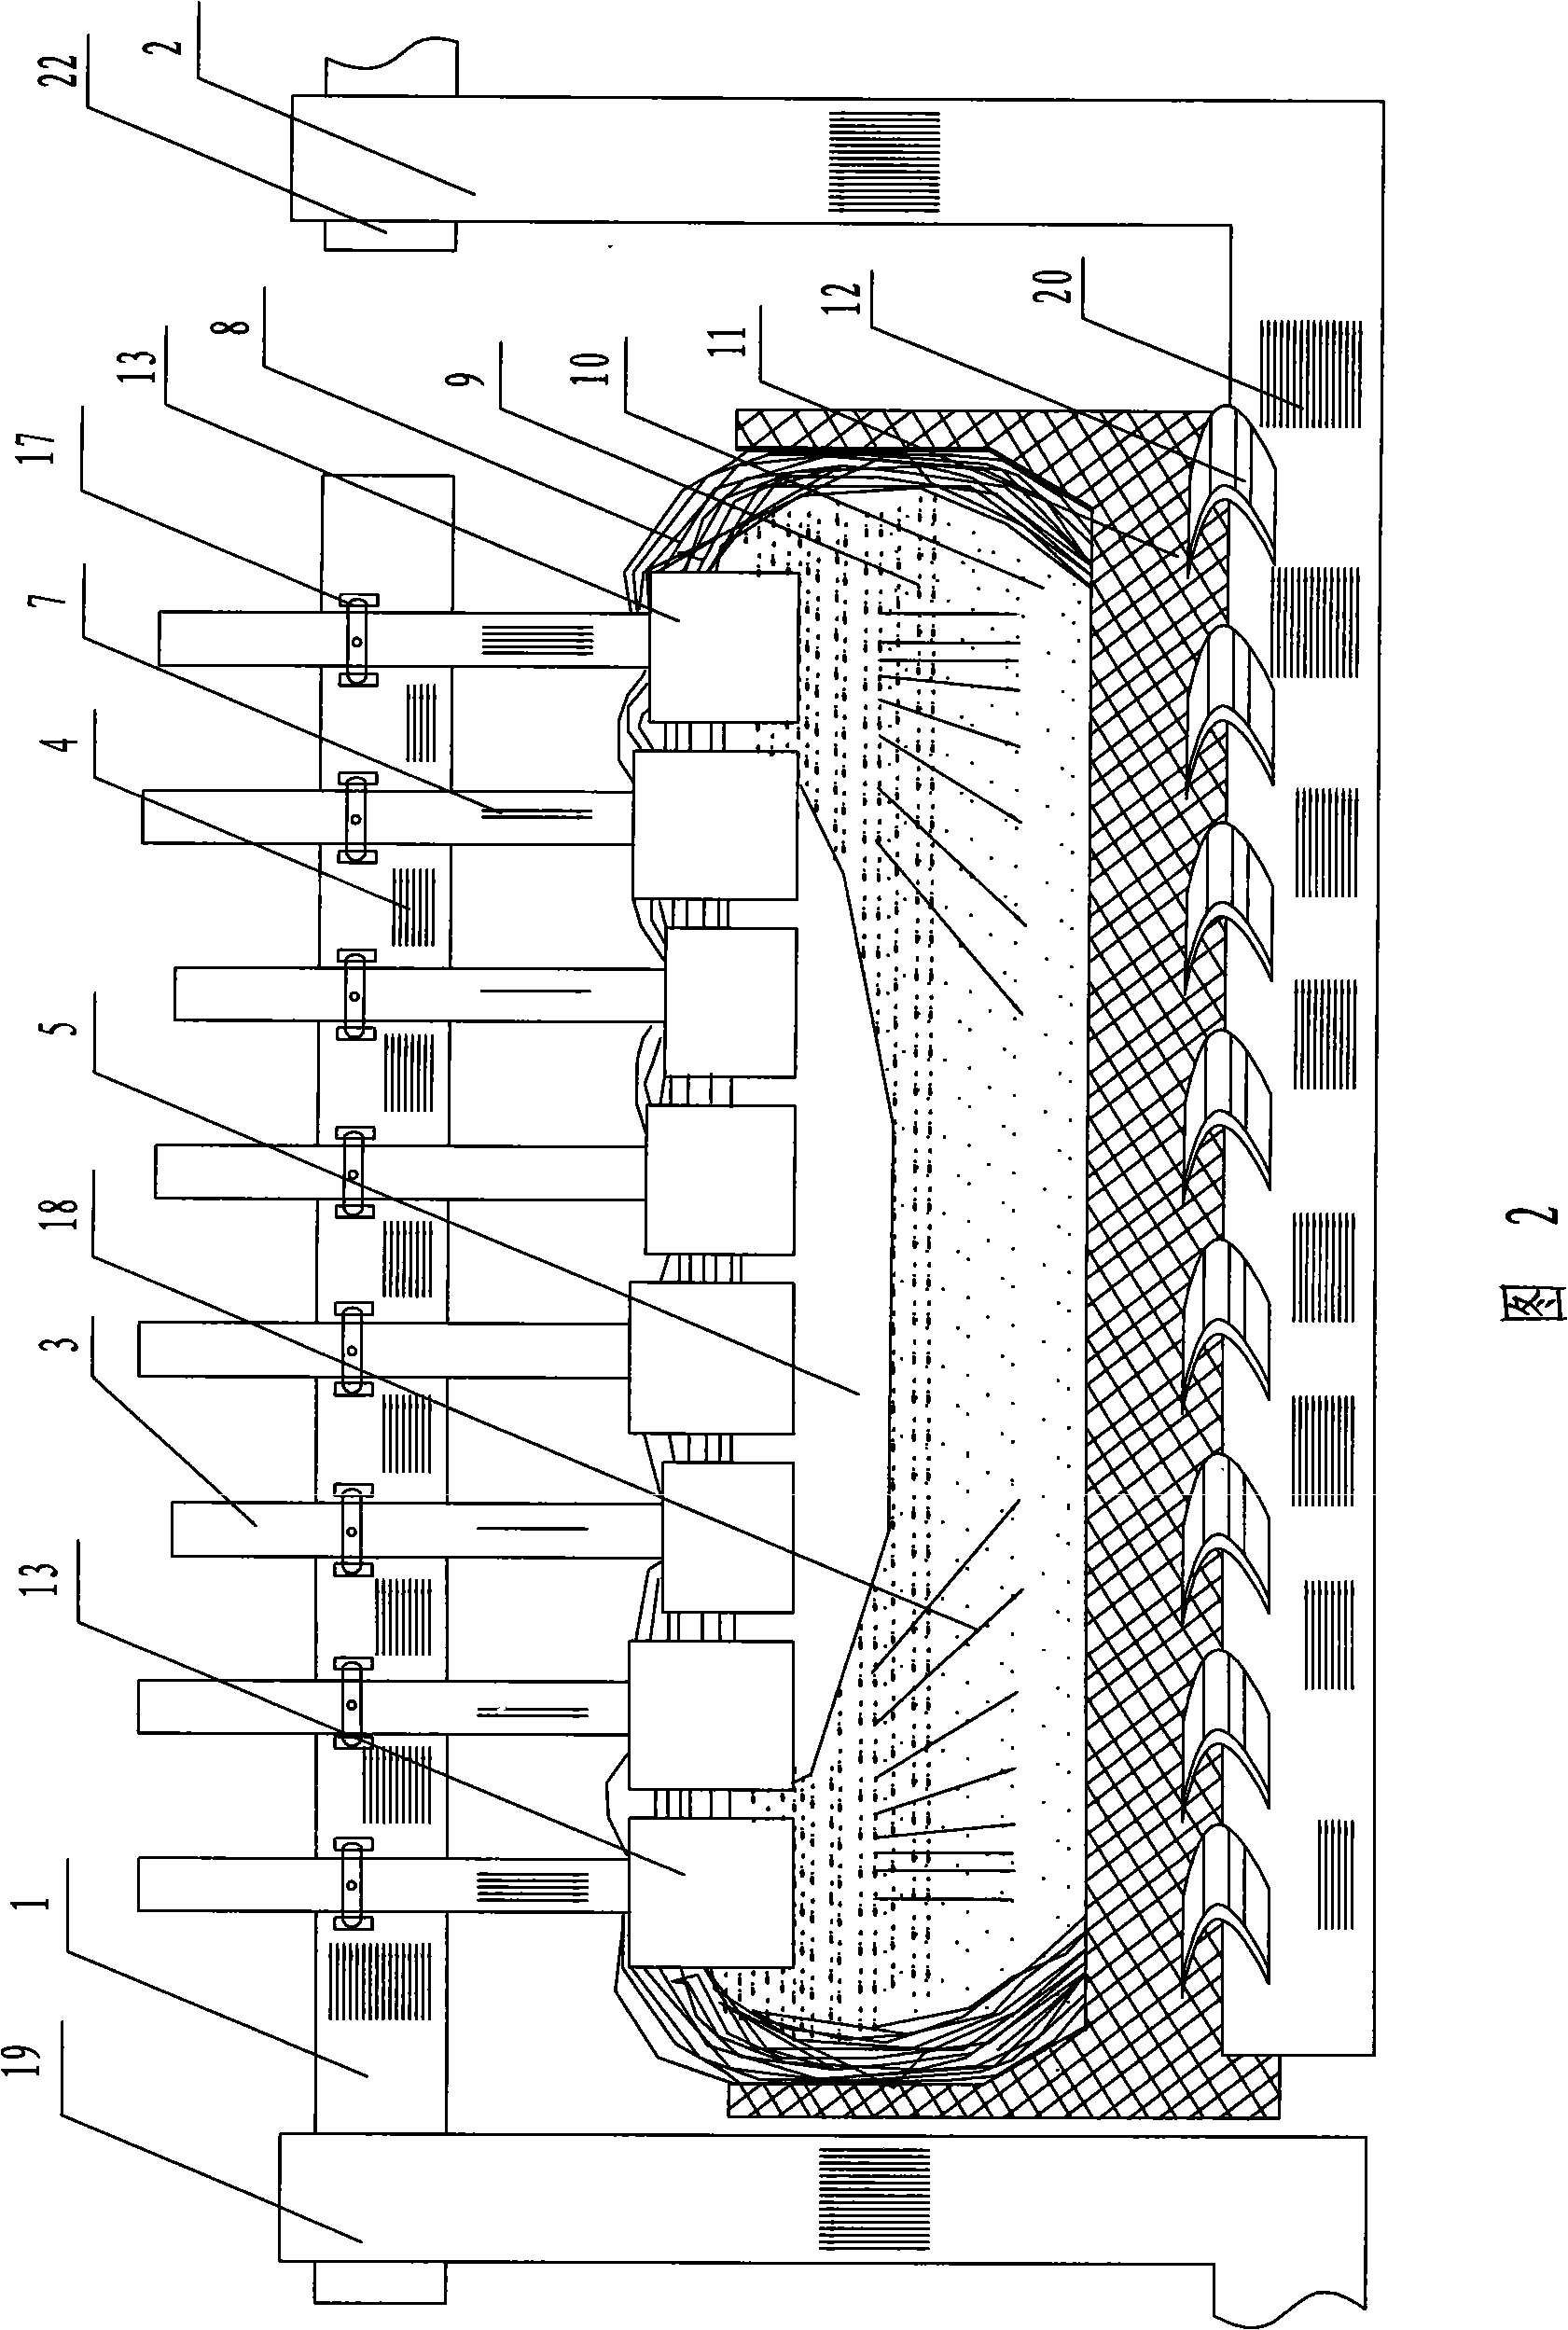 Single anode shunt and regulation apparatus electrolyzed by multiple anodes cell and method